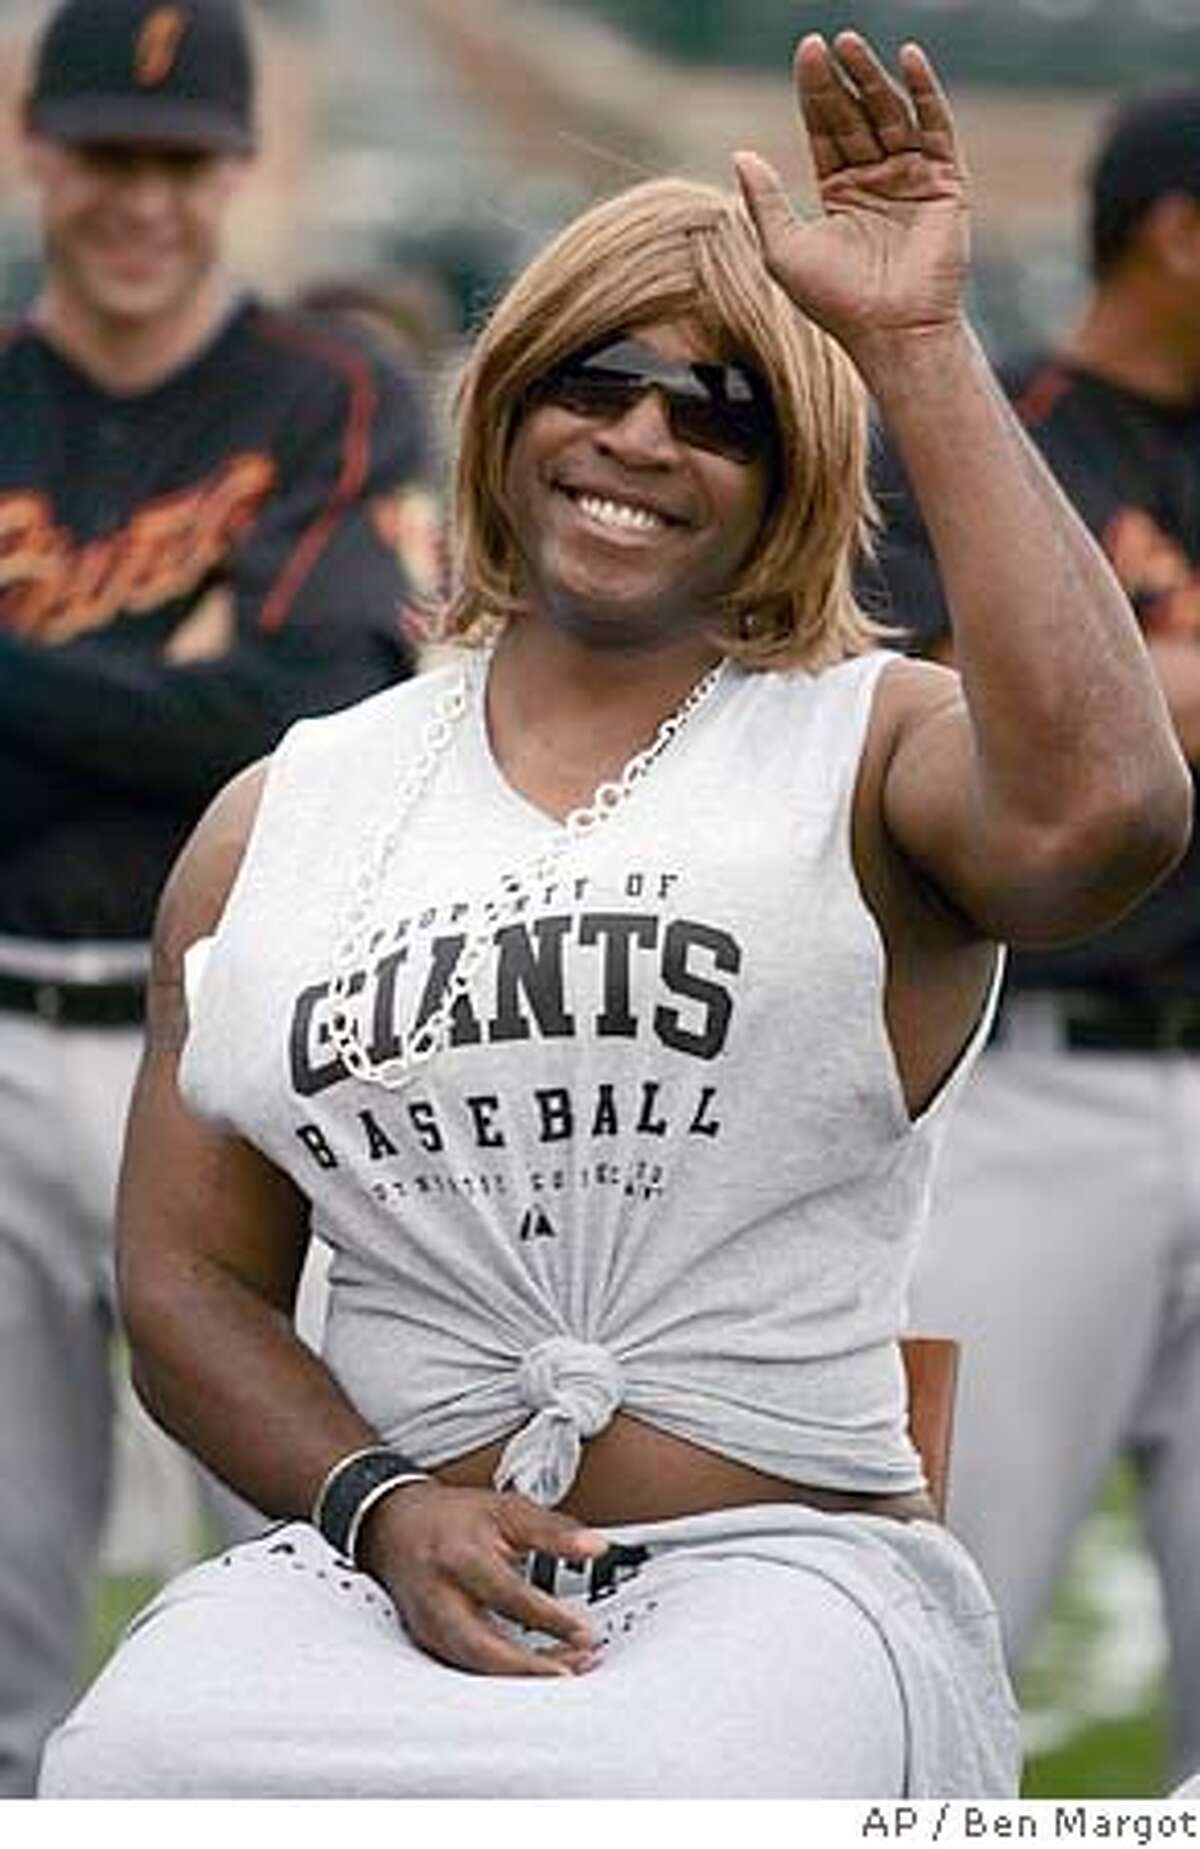 Dressed in drag portraying Paula Abdul on "American Idol," San Francisco Giants left fielder Barry Bonds waves to fans as he participates in a rookie hazing spoof of the hit television show for a second day prior to a Major League baseball spring training workout Wednesday, March 1, 2006, in Scottsdale, Ariz. (AP Photo/Ben Margot) EFE OUT